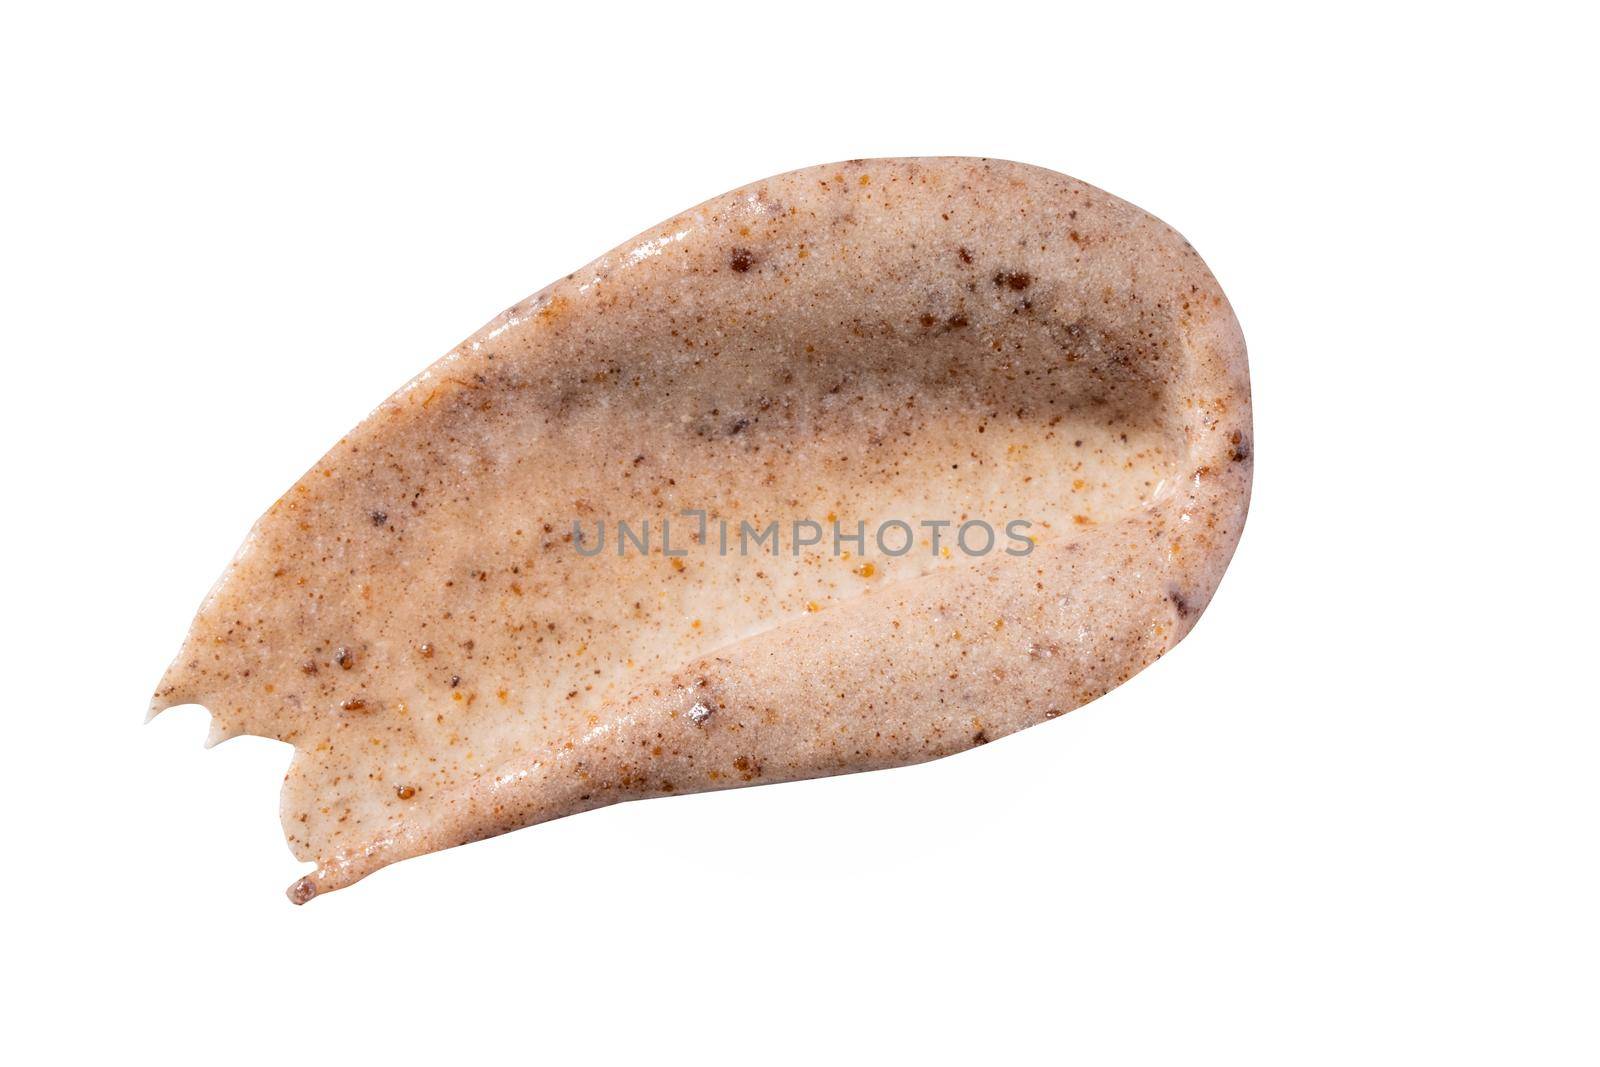 Peeling cream smudge with exfoliating particles. Cosmetic skincare product with abrasive particle sample, gentle nude scrub texture isolate. Scrub smear swatch isolated on white background.